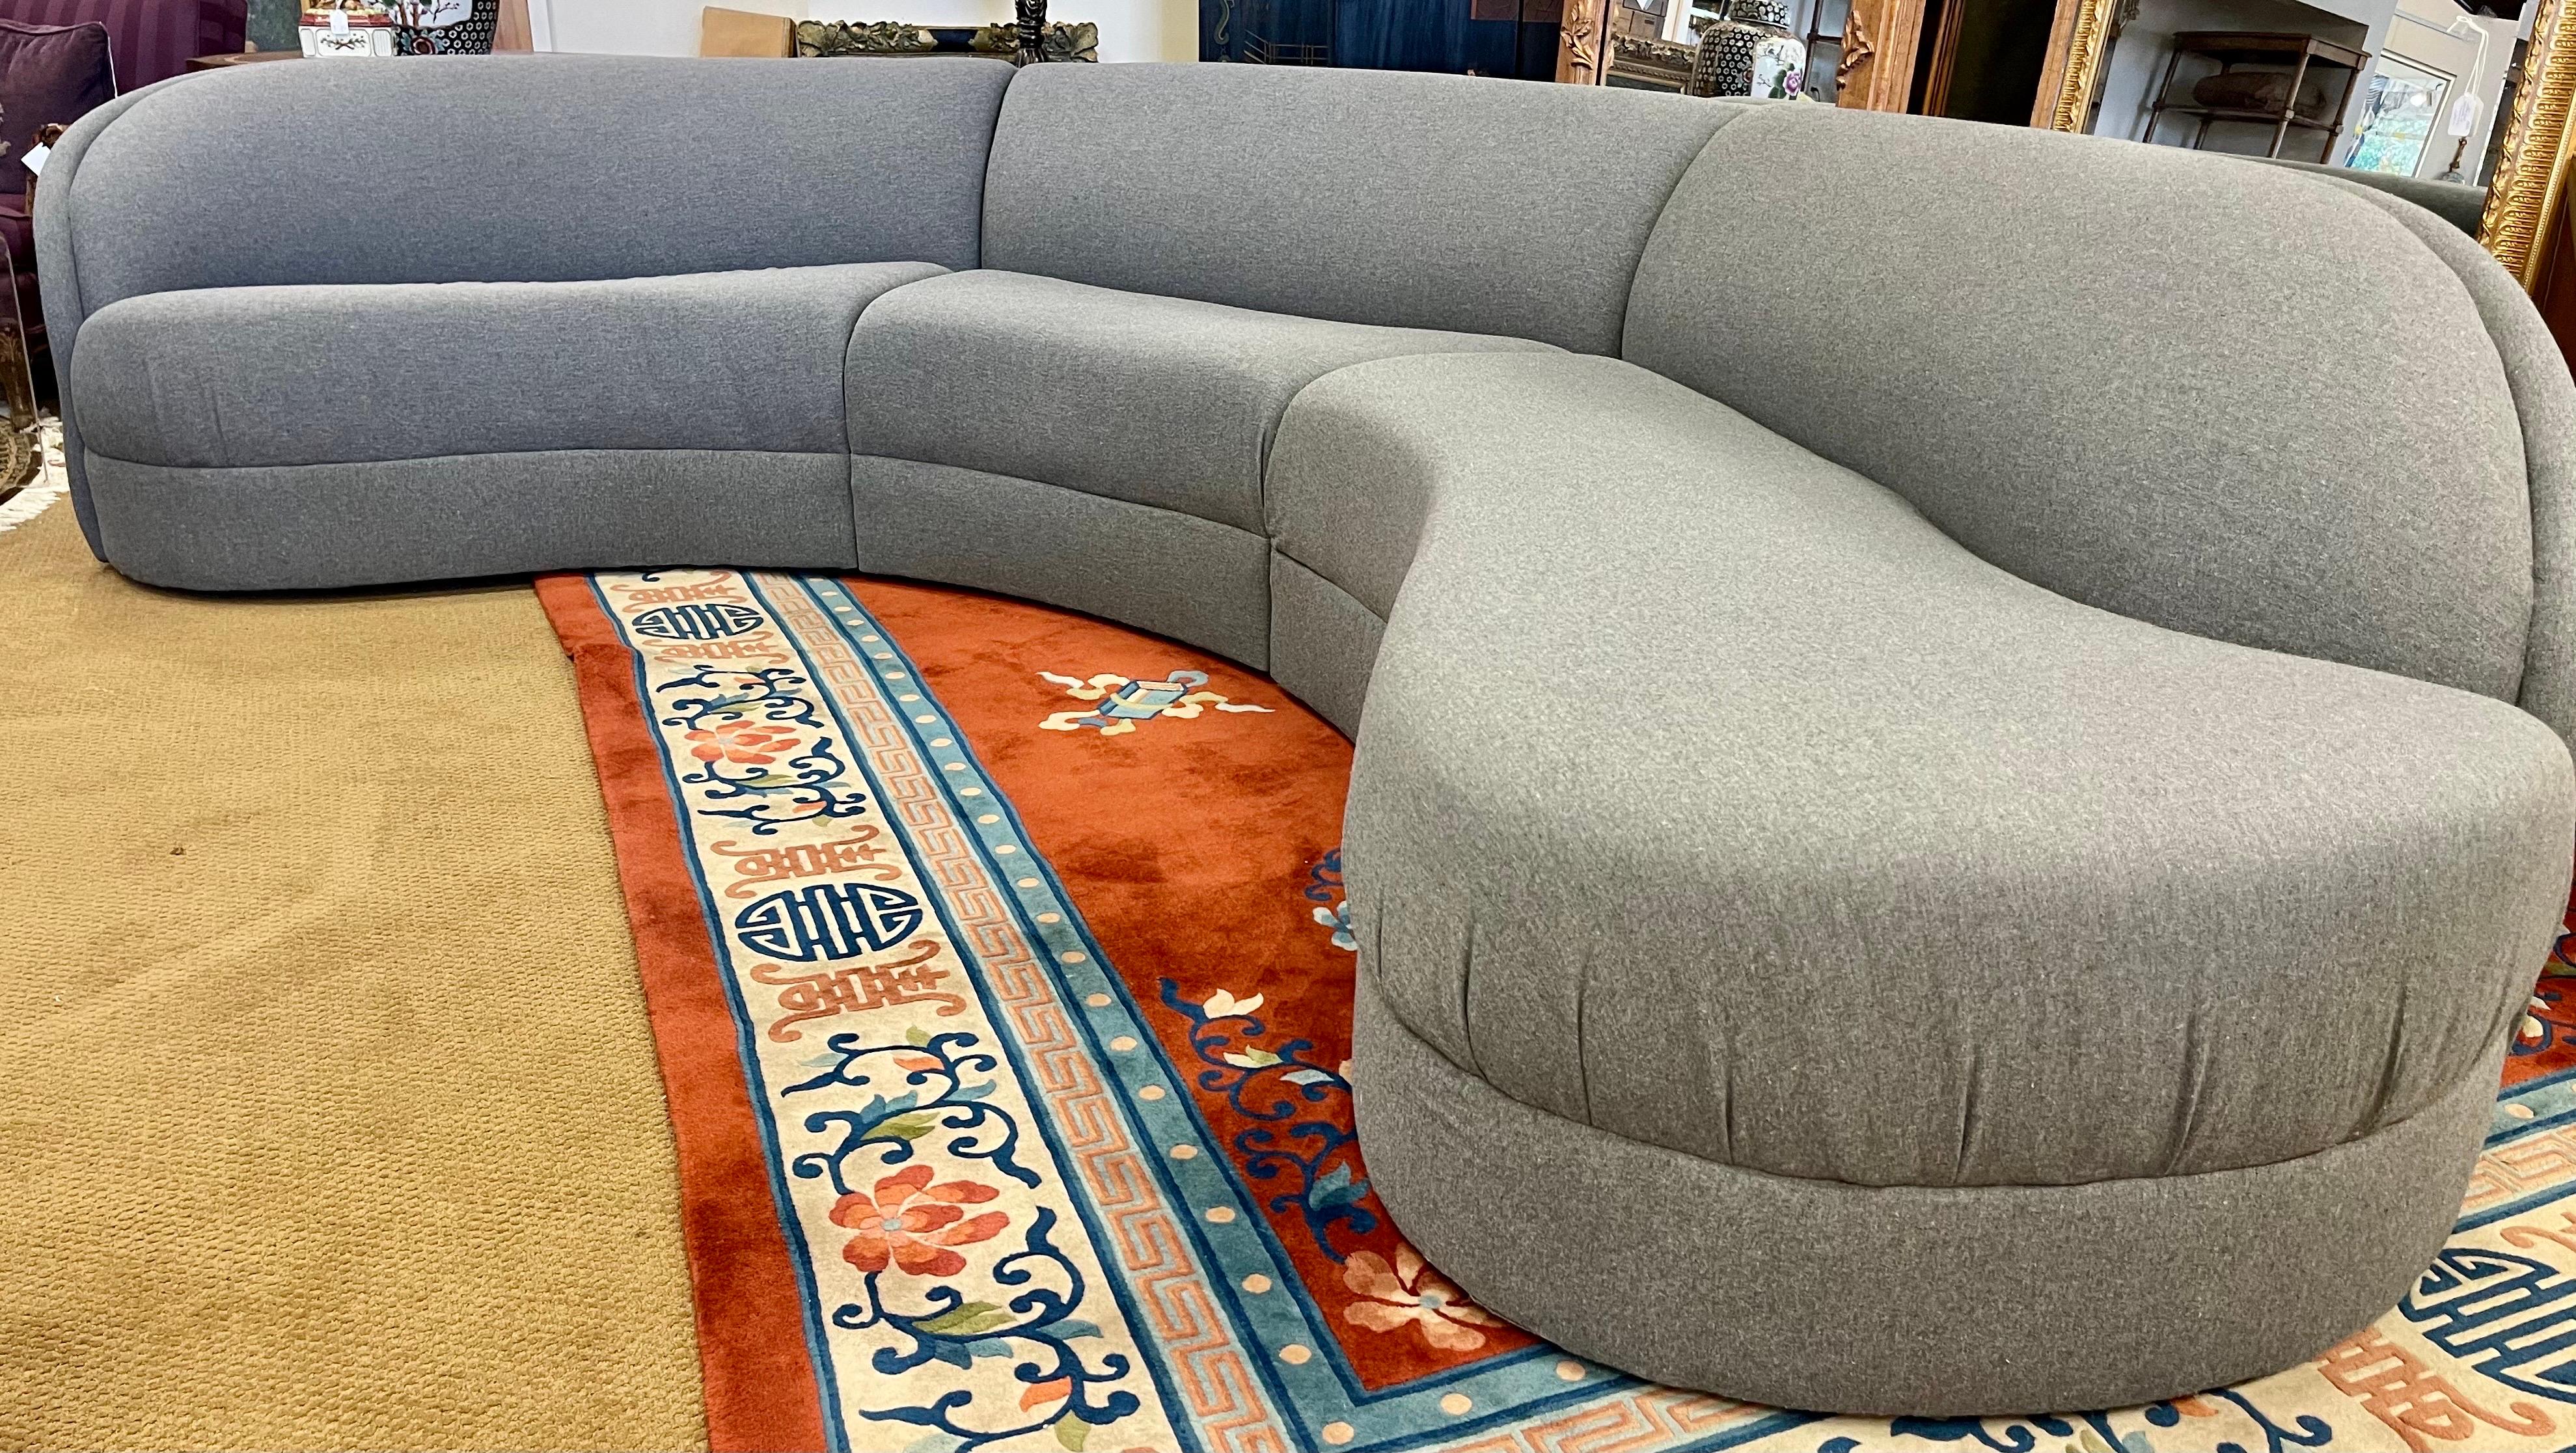 Magnificent Mid-Century Modern cloud sectional sofa. Biomorphic shape with great scale and lines to die for! Will be the most comfortable seating in your home. Fabric is a medium gray solid color and still in great condition. You can tell that this